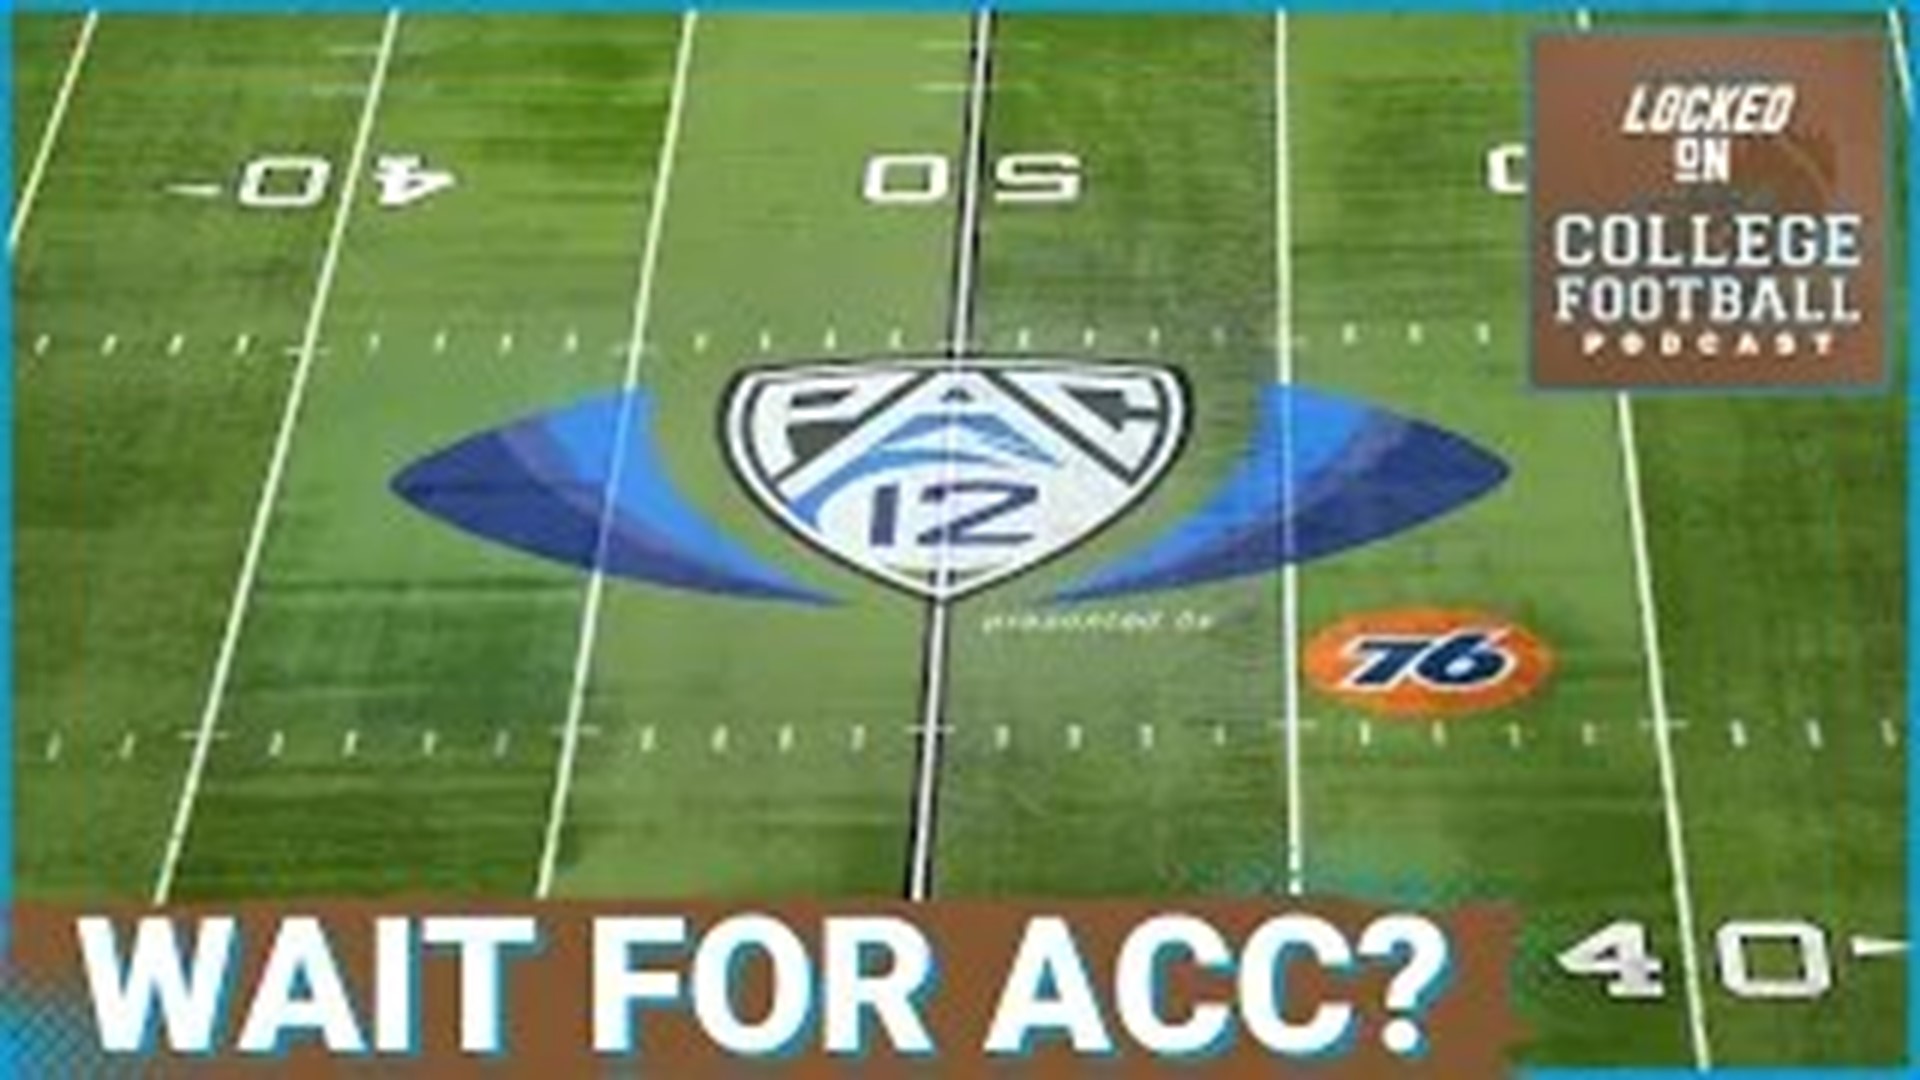 The Pac-12's war chest is pushing  $300M to rebuild the conference under the Pac-12 label, with plenty of schools and options at their disposal.